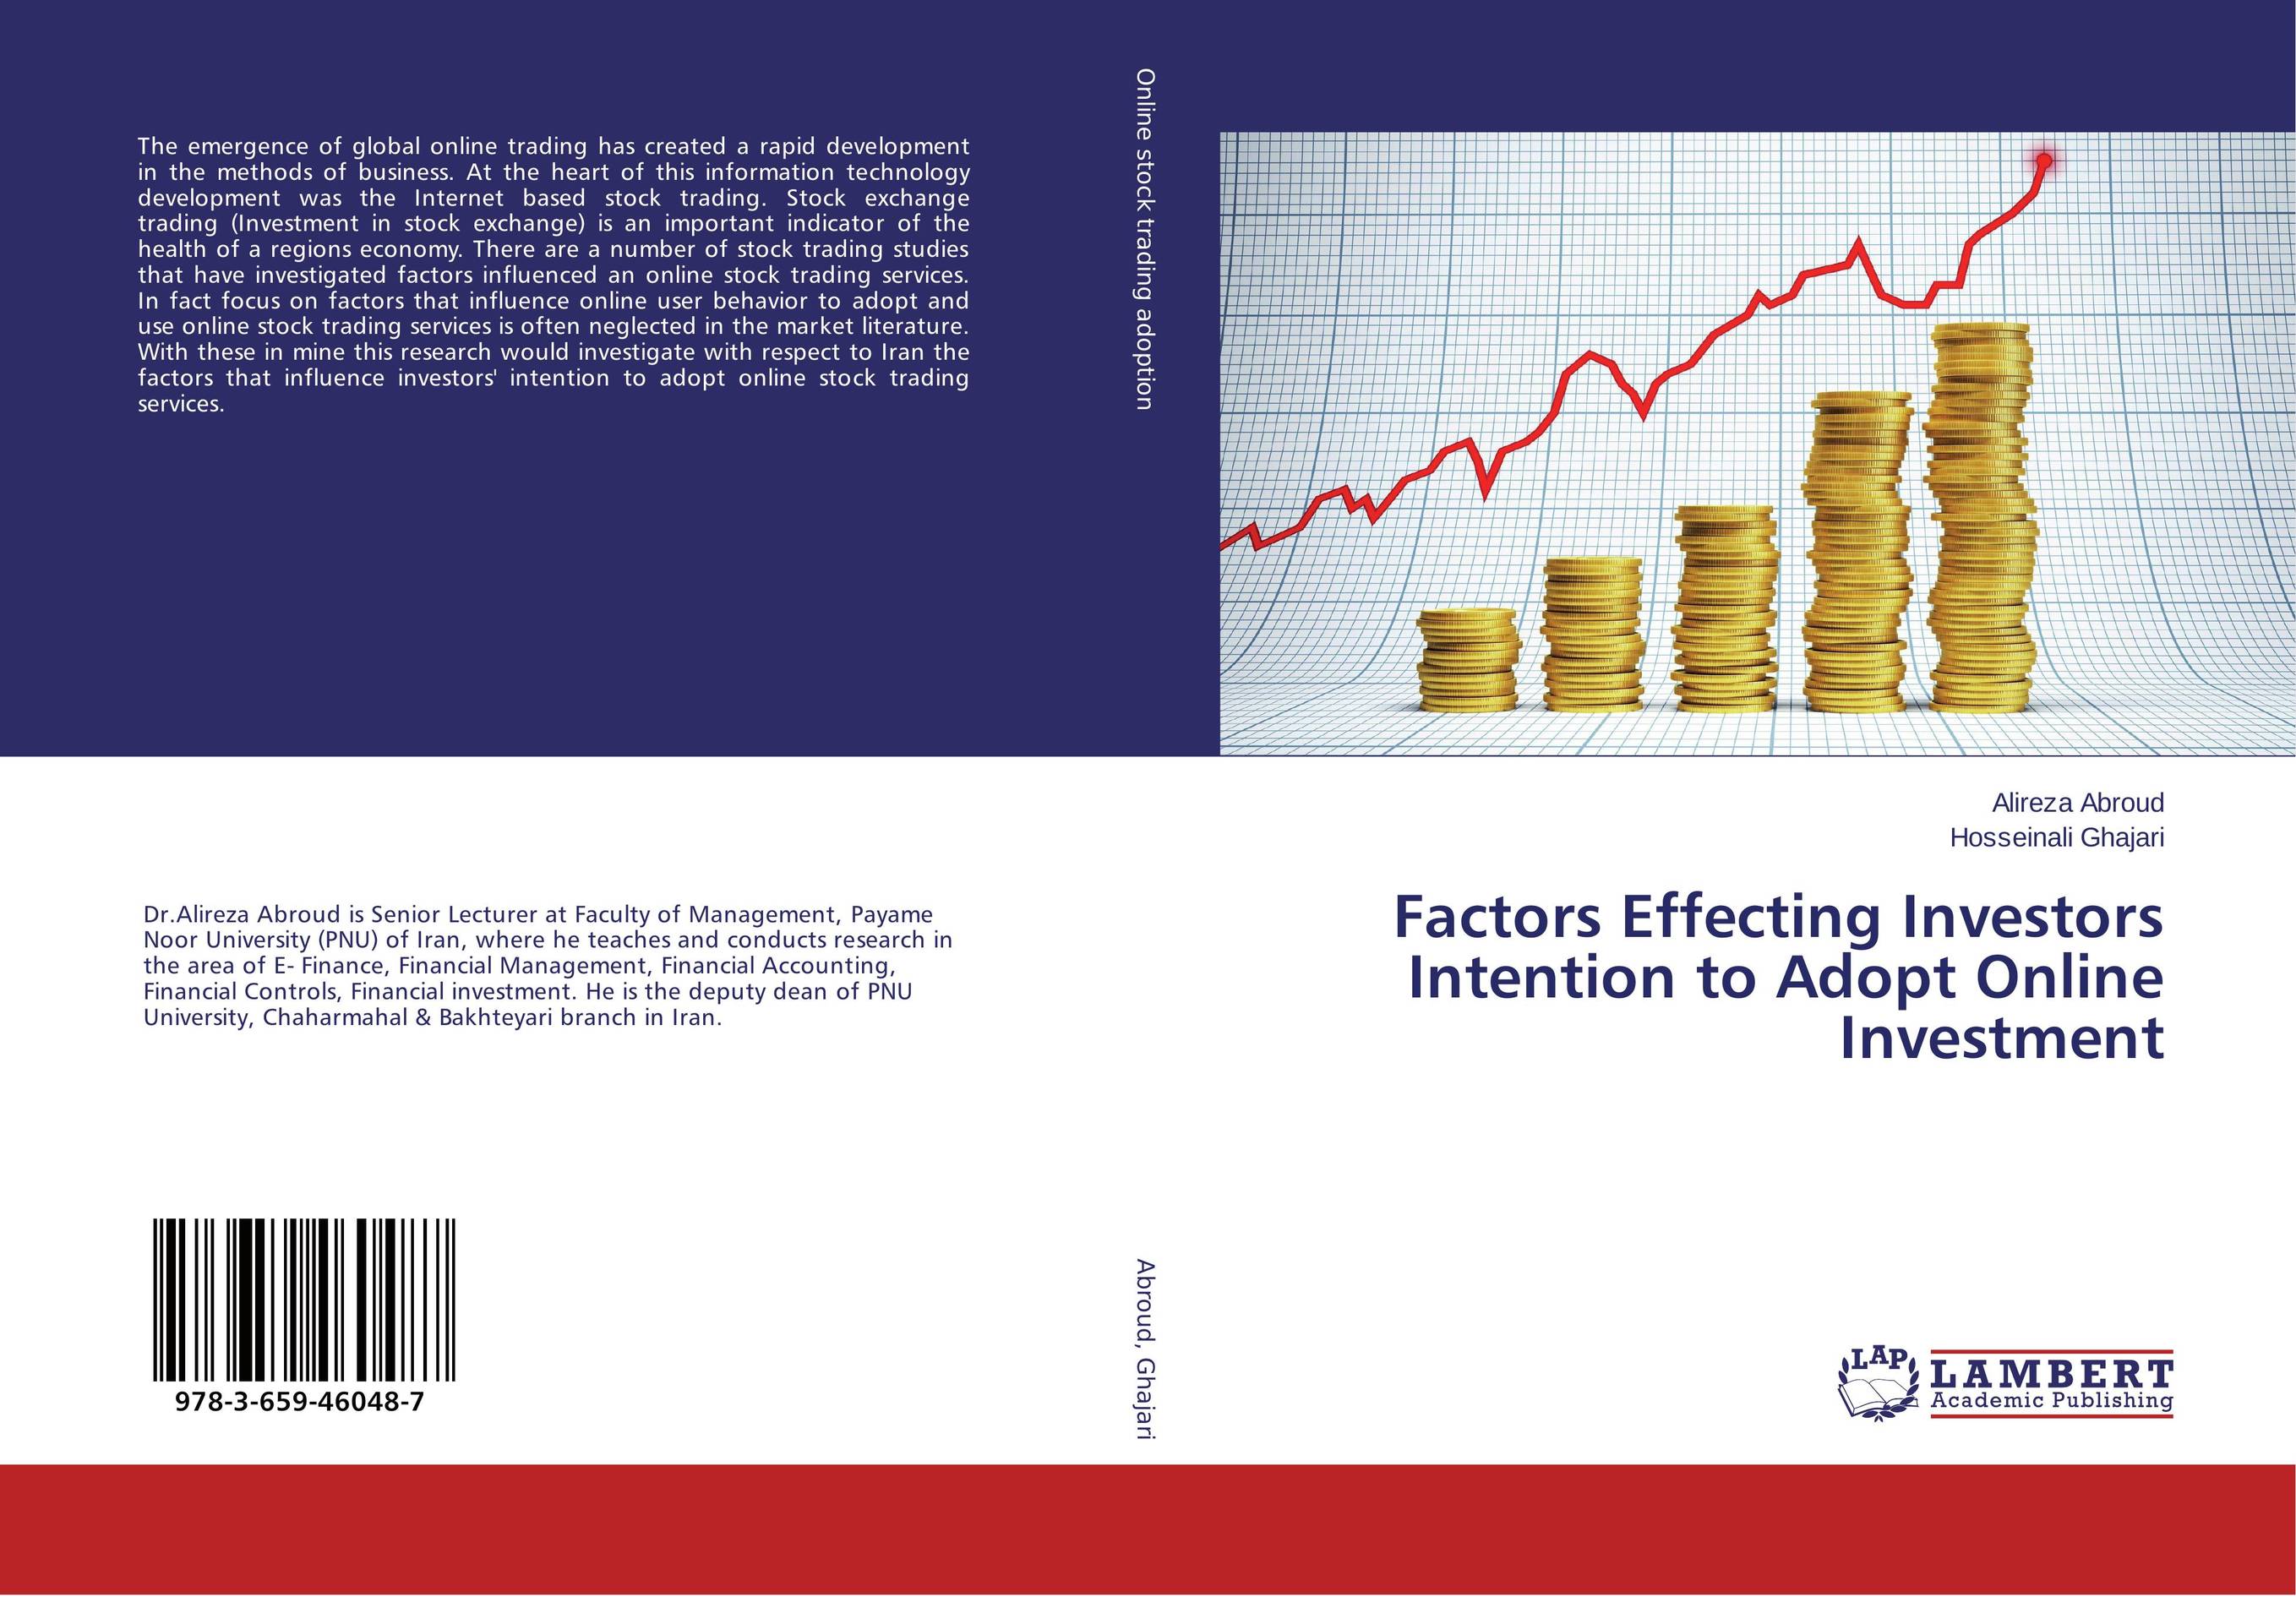 Factors Effecting Investors Intention to Adopt Online Investment